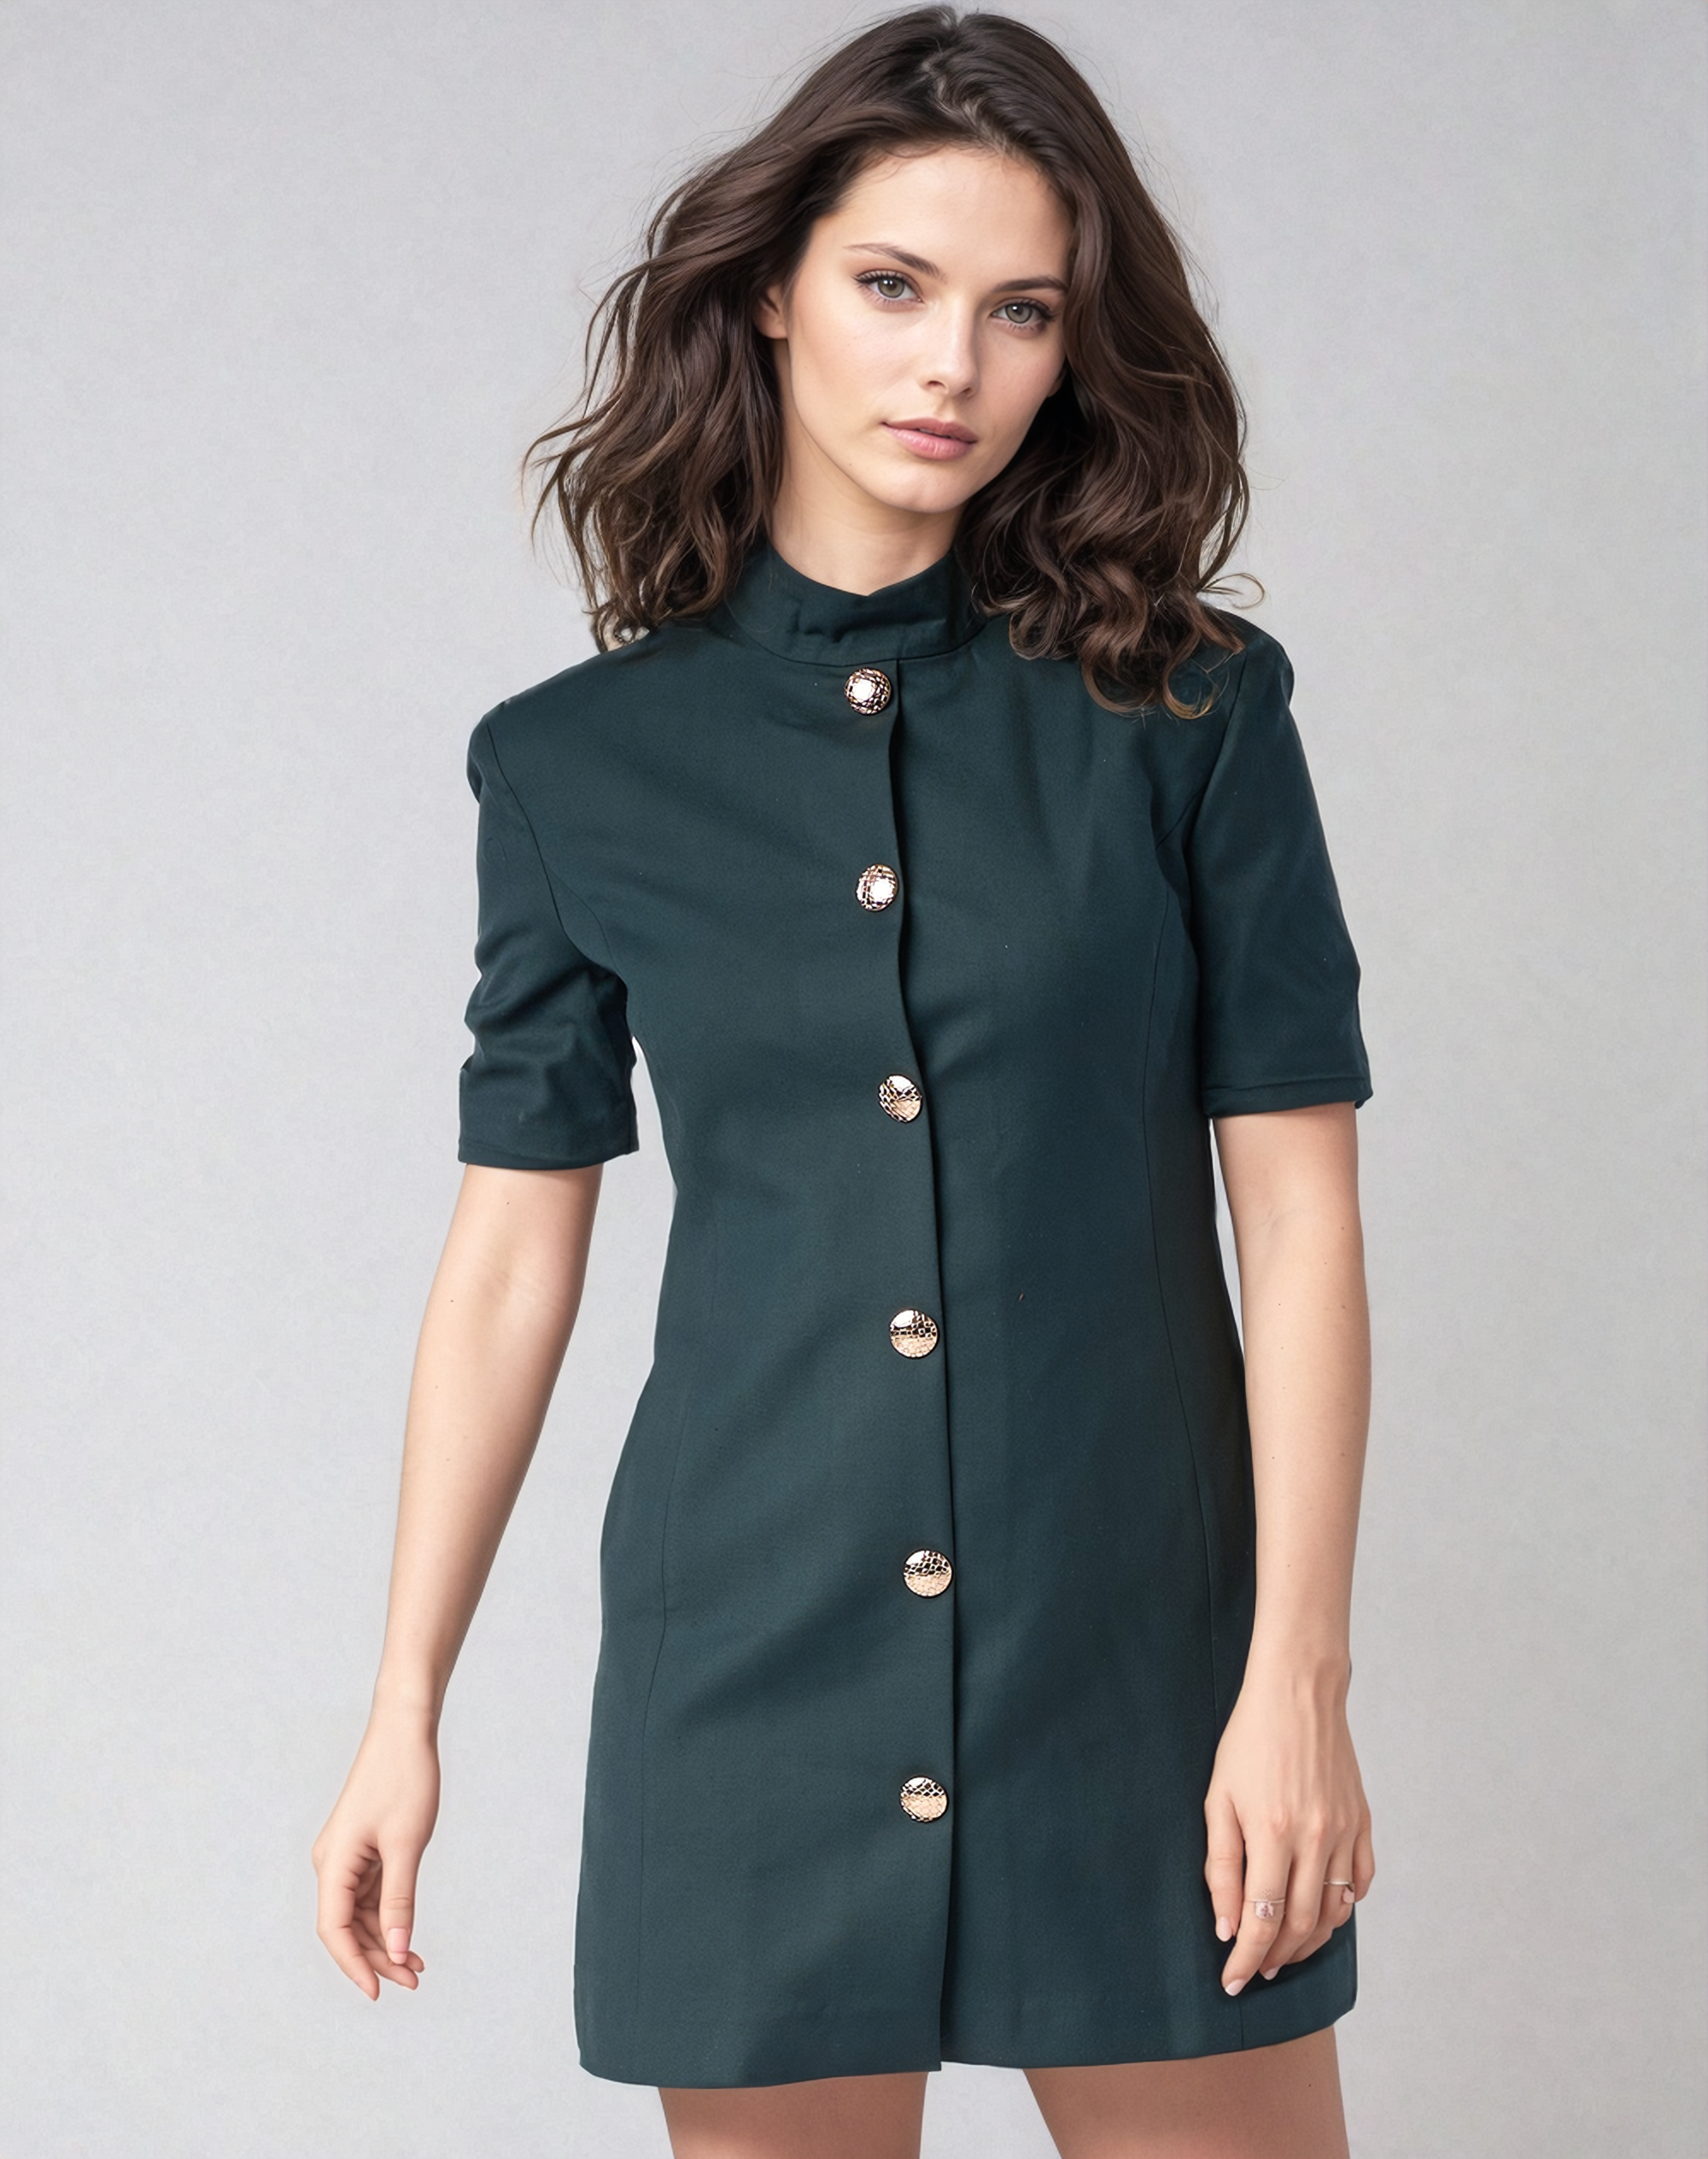 Cara Broad-Shouldered Dress with Elegant Seams and Stylish Details